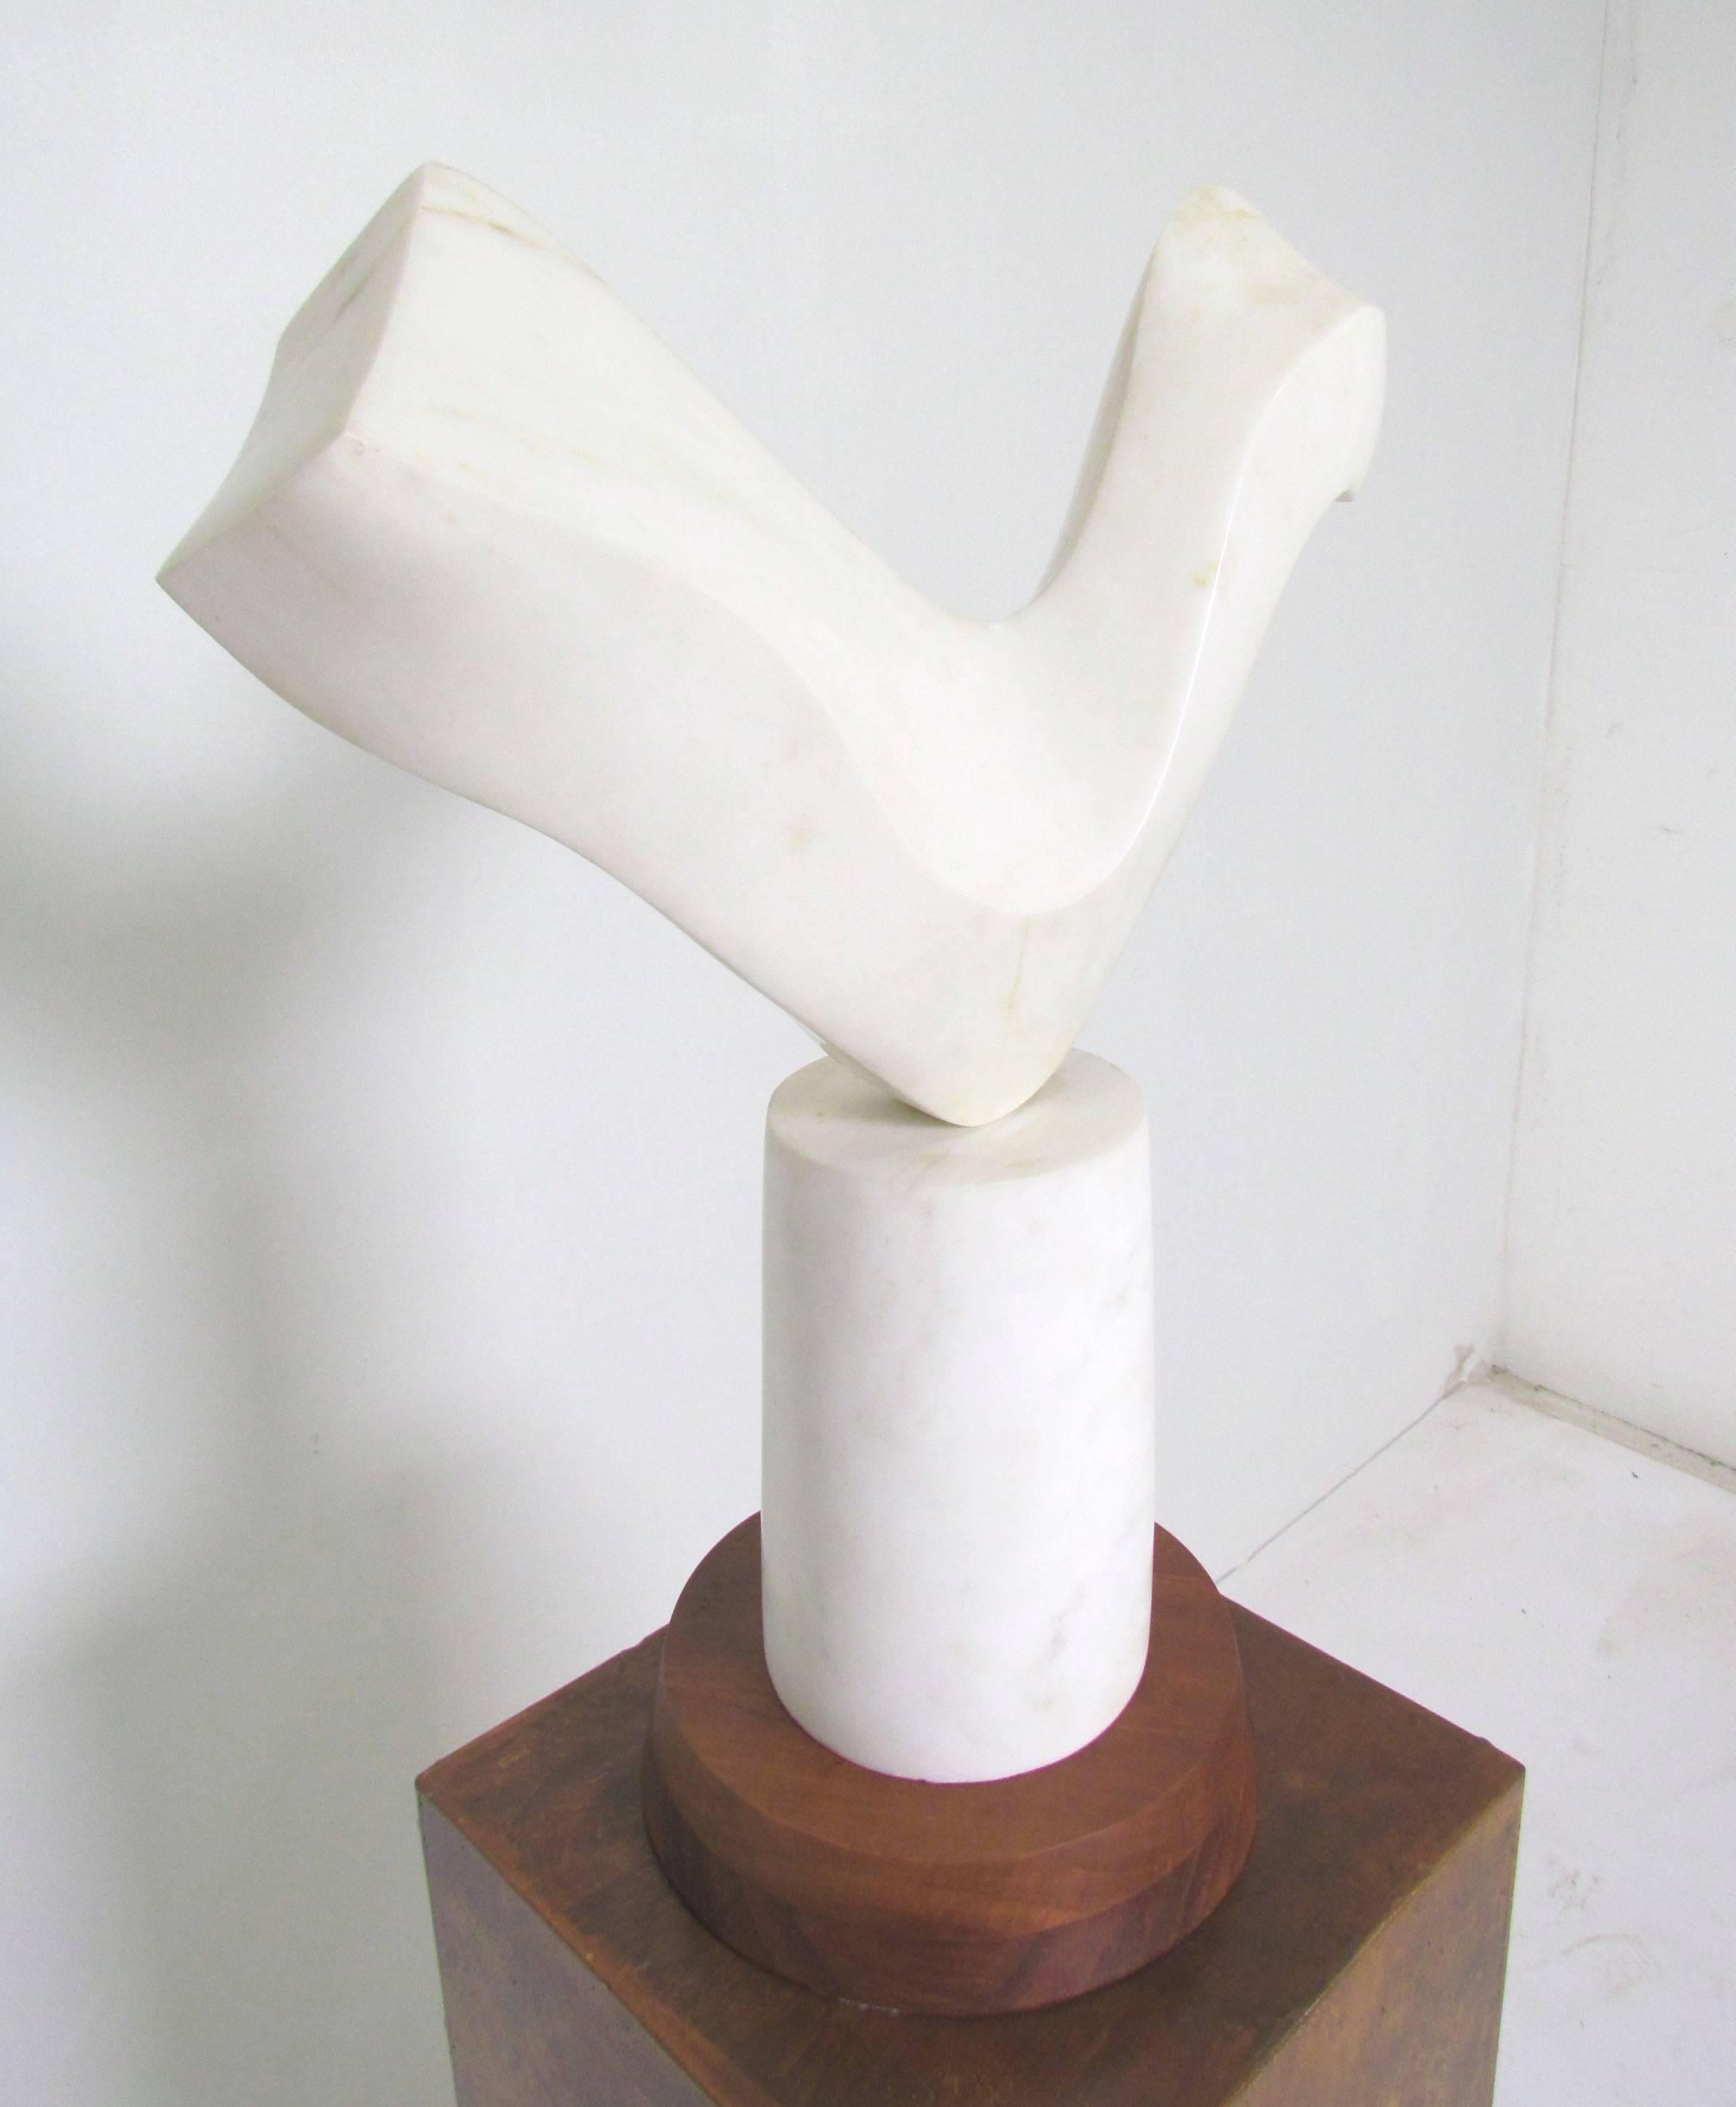 American Abstract Marble Sculpture Signed M. Sokell, Dated 1969, with Burl Pedestal